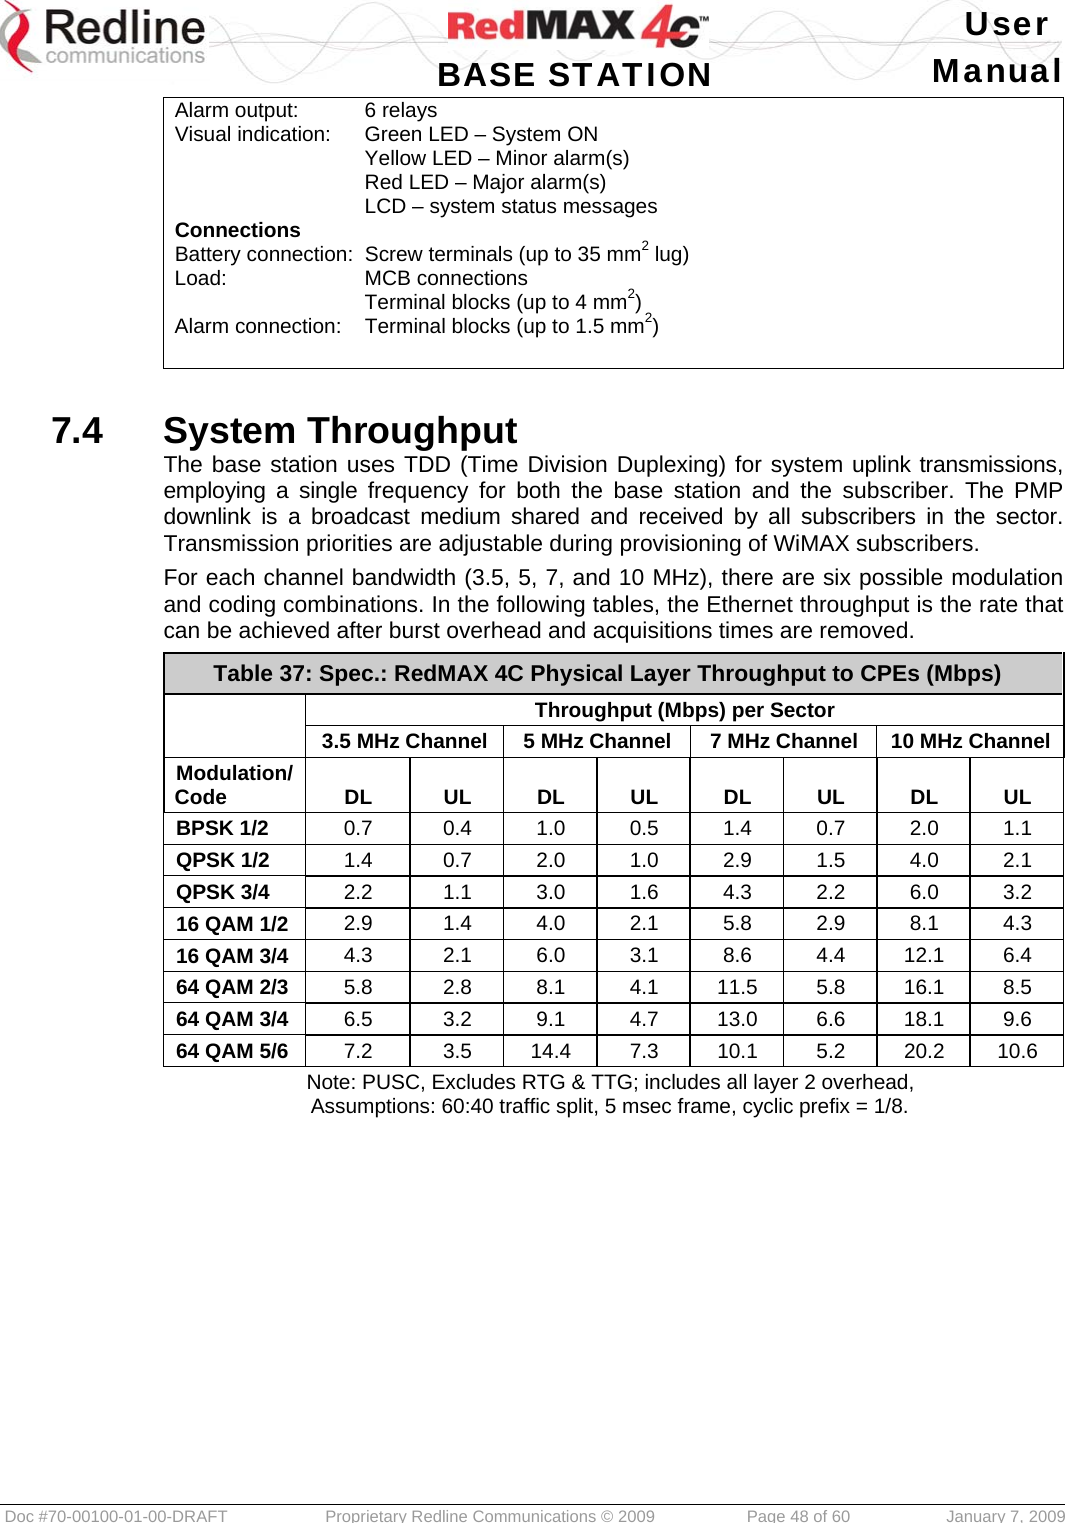   User  BASE STATION Manual  Doc #70-00100-01-00-DRAFT  Proprietary Redline Communications © 2009   Page 48 of 60  January 7, 2009 Alarm output:  6 relays Visual indication:  Green LED – System ON   Yellow LED – Minor alarm(s)   Red LED – Major alarm(s)   LCD – system status messages Connections Battery connection:  Screw terminals (up to 35 mm2 lug) Load: MCB connections   Terminal blocks (up to 4 mm2) Alarm connection:  Terminal blocks (up to 1.5 mm2)   7.4  System Throughput The base station uses TDD (Time Division Duplexing) for system uplink transmissions, employing a single frequency for both the base station and the subscriber. The PMP downlink is a broadcast medium shared and received by all subscribers in the sector. Transmission priorities are adjustable during provisioning of WiMAX subscribers. For each channel bandwidth (3.5, 5, 7, and 10 MHz), there are six possible modulation and coding combinations. In the following tables, the Ethernet throughput is the rate that can be achieved after burst overhead and acquisitions times are removed. Table 37: Spec.: RedMAX 4C Physical Layer Throughput to CPEs (Mbps)   Throughput (Mbps) per Sector   3.5 MHz Channel  5 MHz Channel  7 MHz Channel  10 MHz Channel Modulation/Code  DL  UL DL UL DL UL DL UL BPSK 1/2  0.7   0.4   1.0   0.5   1.4   0.7   2.0   1.1  QPSK 1/2  1.4   0.7   2.0   1.0   2.9   1.5   4.0   2.1  QPSK 3/4  2.2   1.1   3.0   1.6   4.3   2.2   6.0   3.2  16 QAM 1/2  2.9   1.4   4.0   2.1   5.8   2.9   8.1   4.3  16 QAM 3/4  4.3   2.1   6.0   3.1   8.6   4.4   12.1   6.4  64 QAM 2/3  5.8   2.8   8.1   4.1   11.5   5.8   16.1   8.5  64 QAM 3/4  6.5   3.2   9.1   4.7   13.0   6.6   18.1   9.6  64 QAM 5/6  7.2  3.5 14.4 7.3 10.1 5.2 20.2 10.6 Note: PUSC, Excludes RTG &amp; TTG; includes all layer 2 overhead, Assumptions: 60:40 traffic split, 5 msec frame, cyclic prefix = 1/8.    